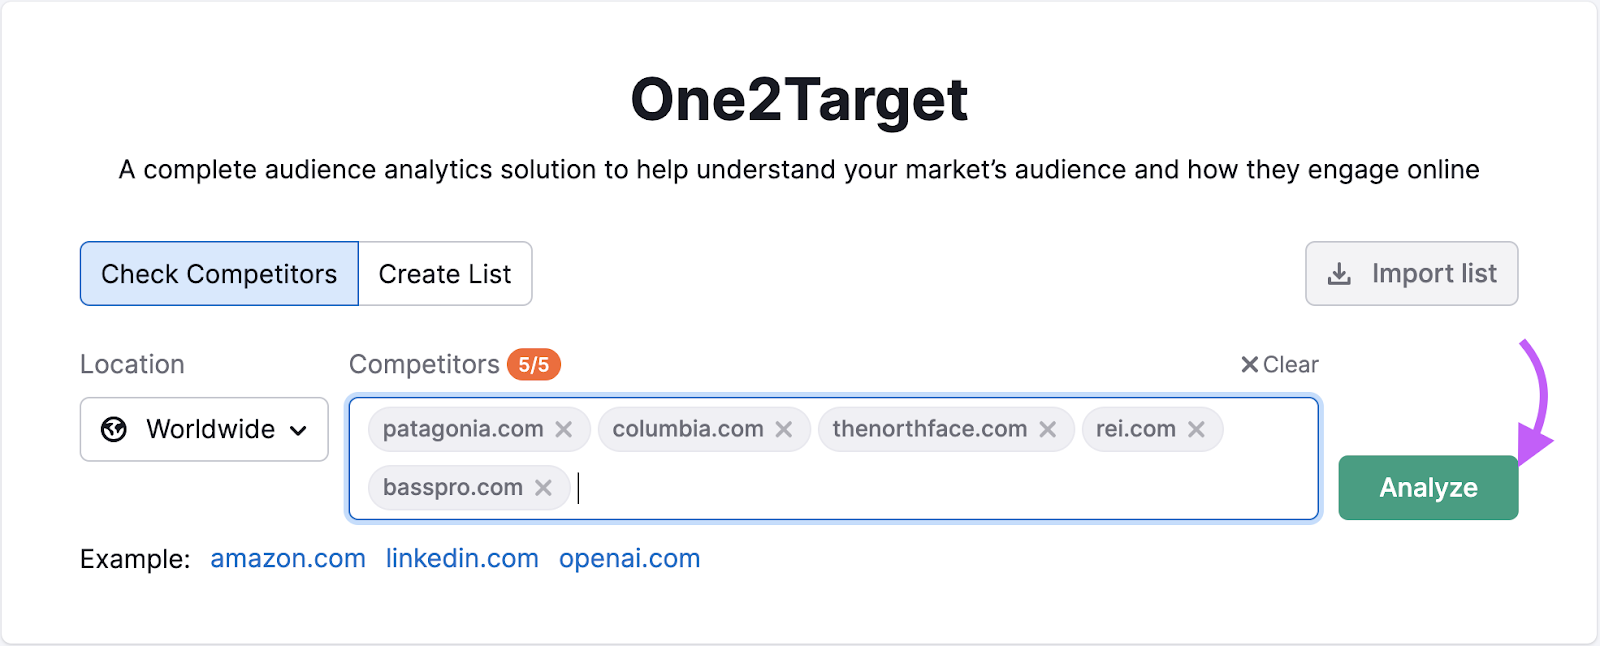 One2Target search